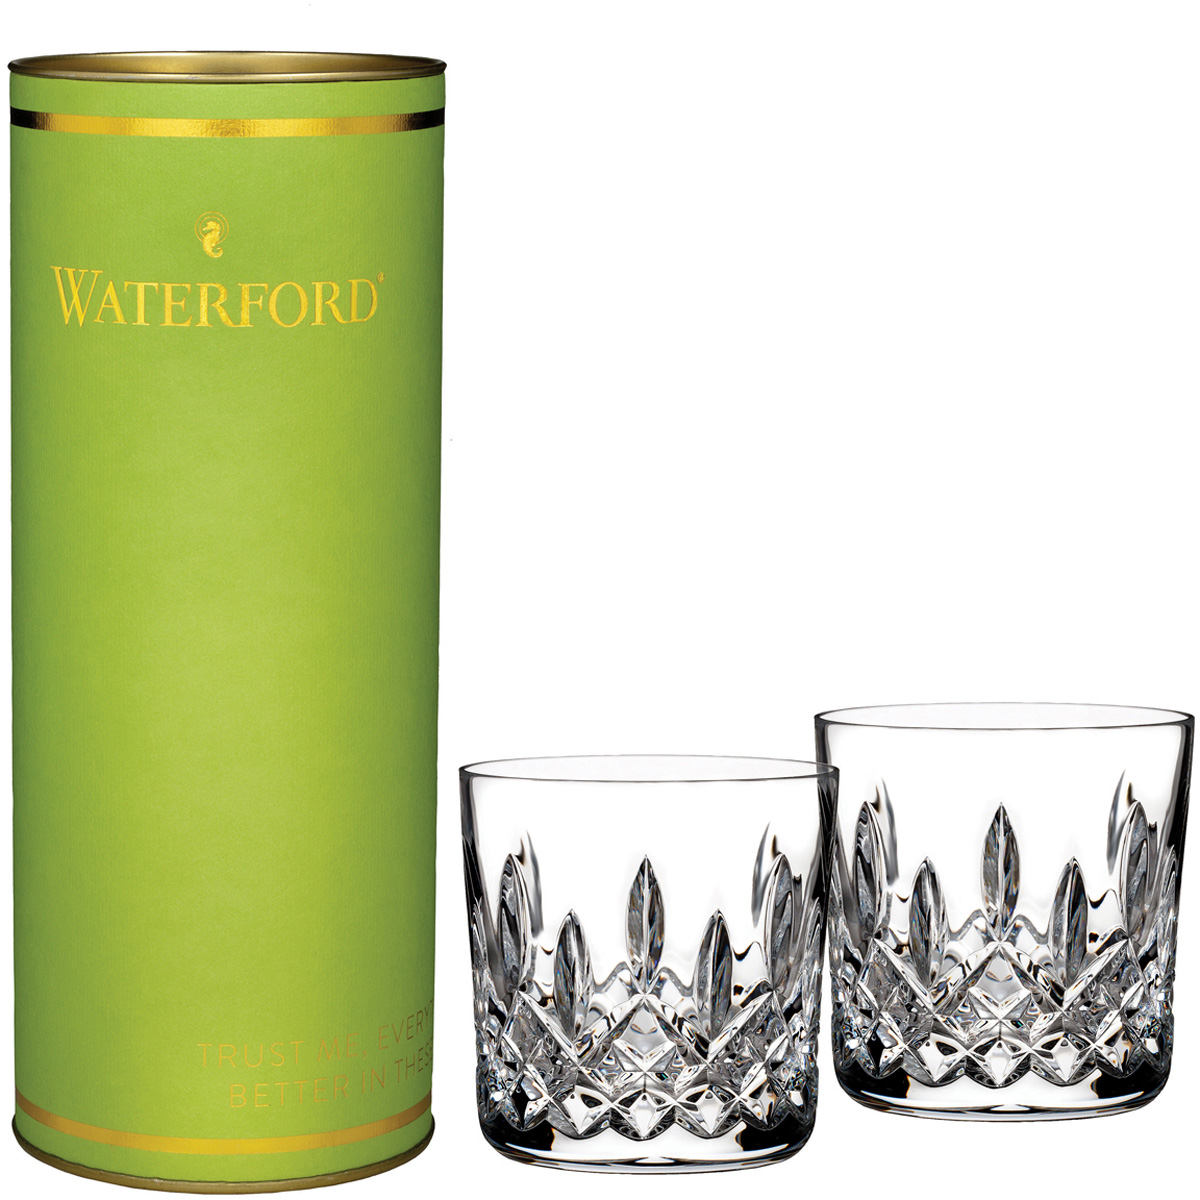 Waterford Lismore Straight Sided Tumbler Pair - 7oz